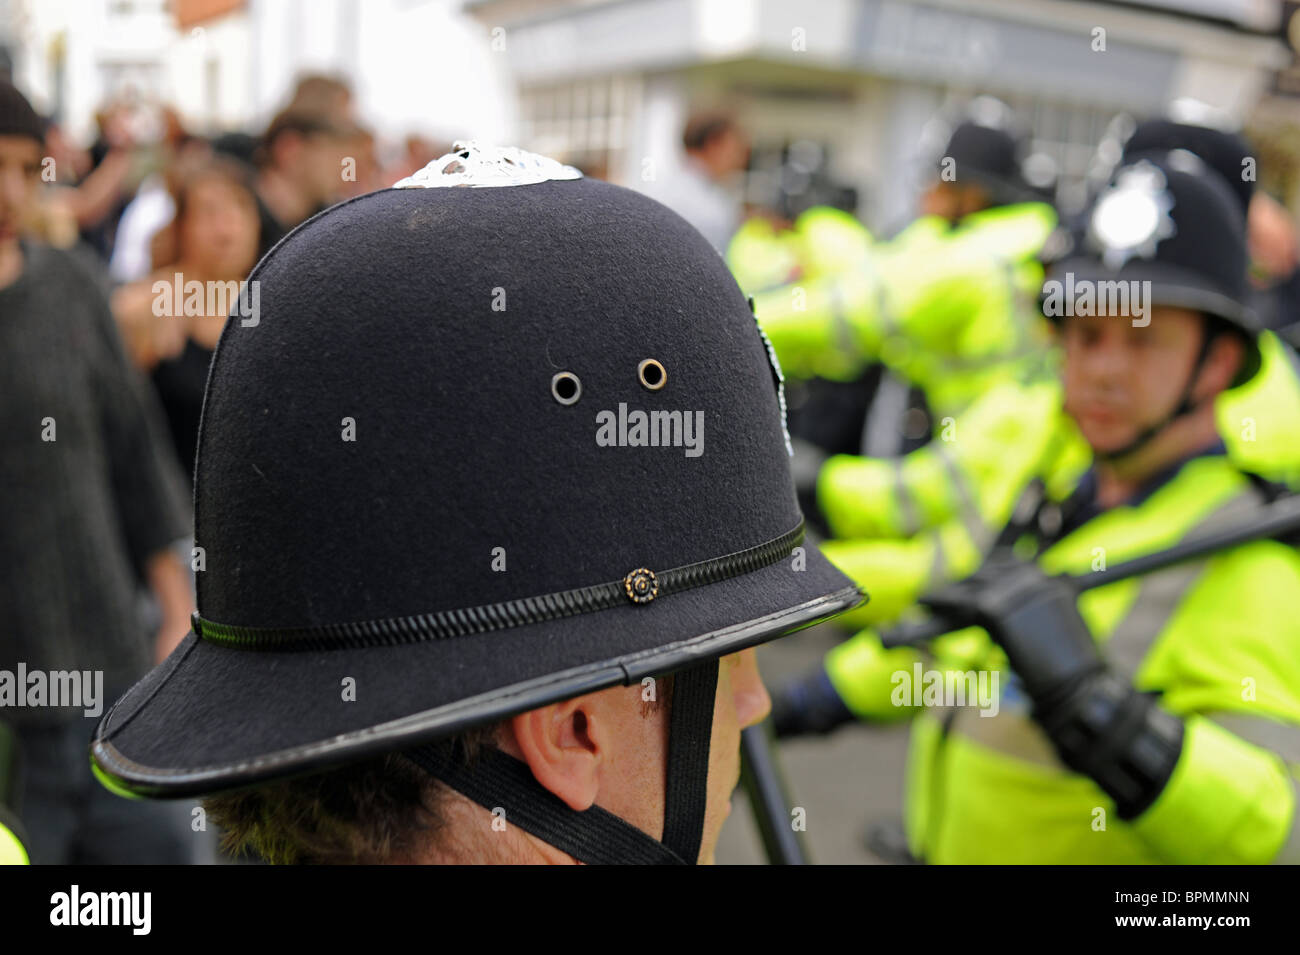 Sussex Police with batons keep control of crowds angry at ENA march through Brighton UK Stock Photo